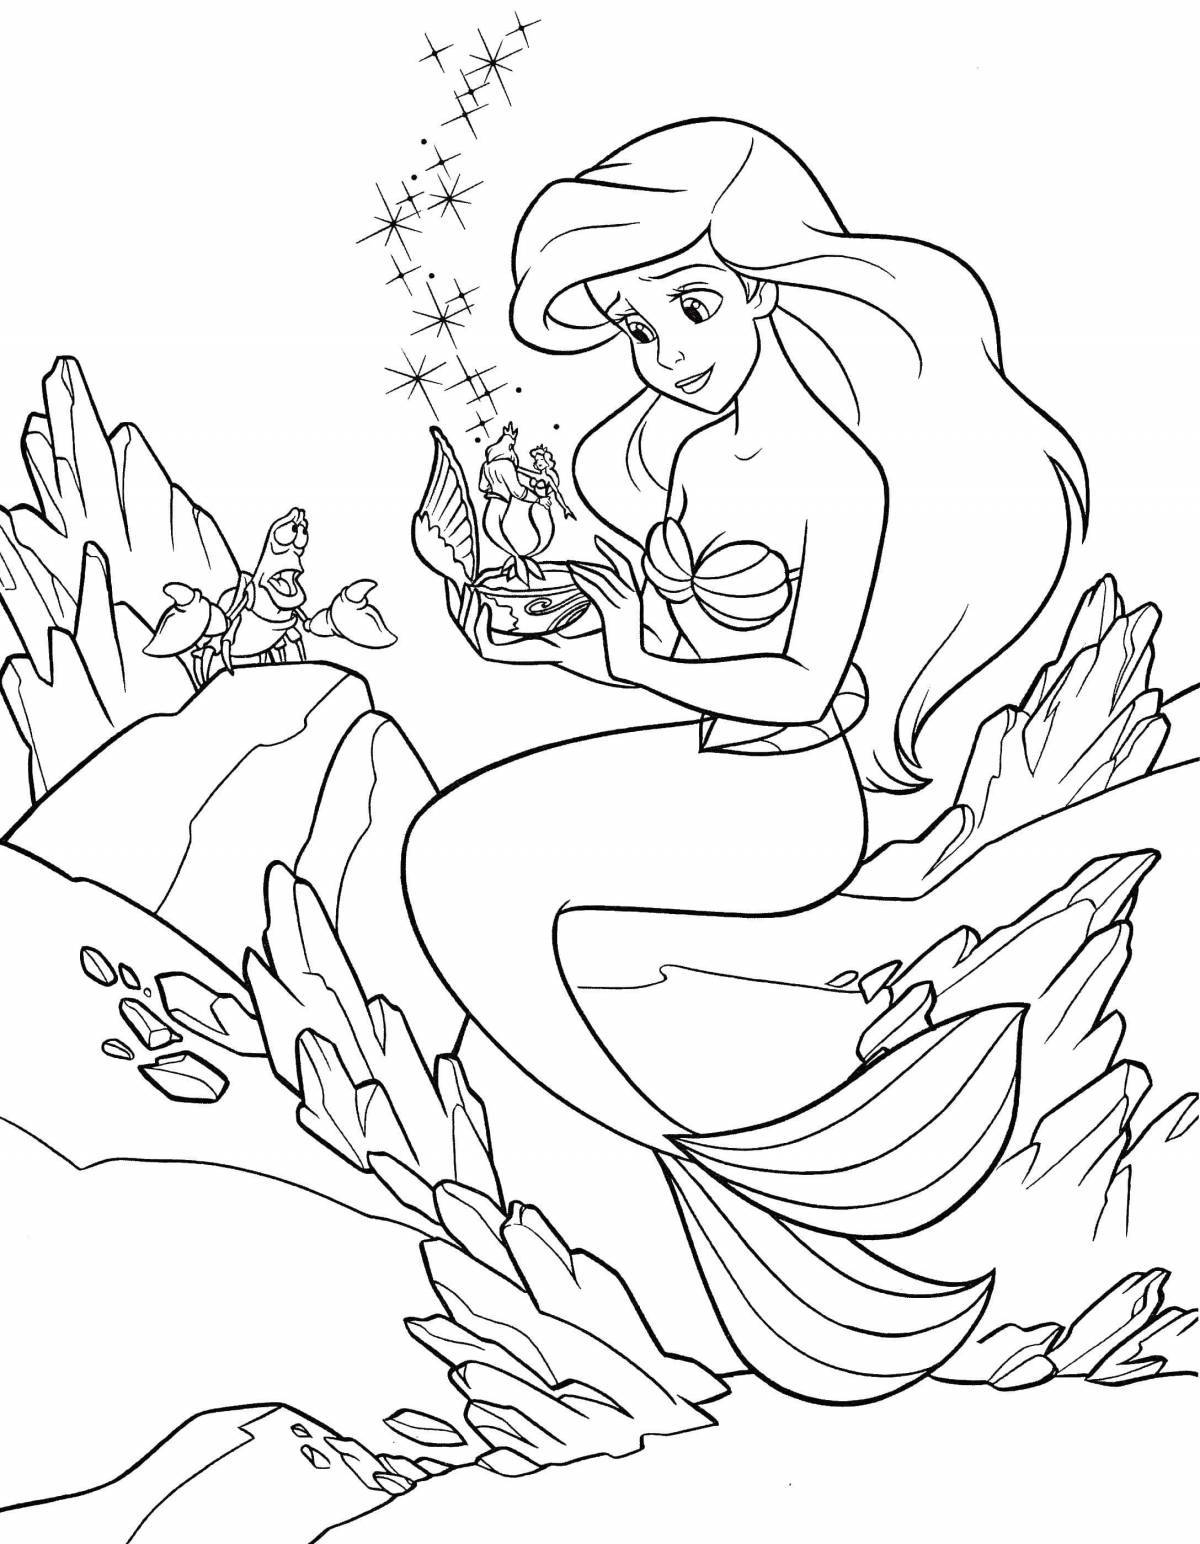 Colorful mermaid coloring page